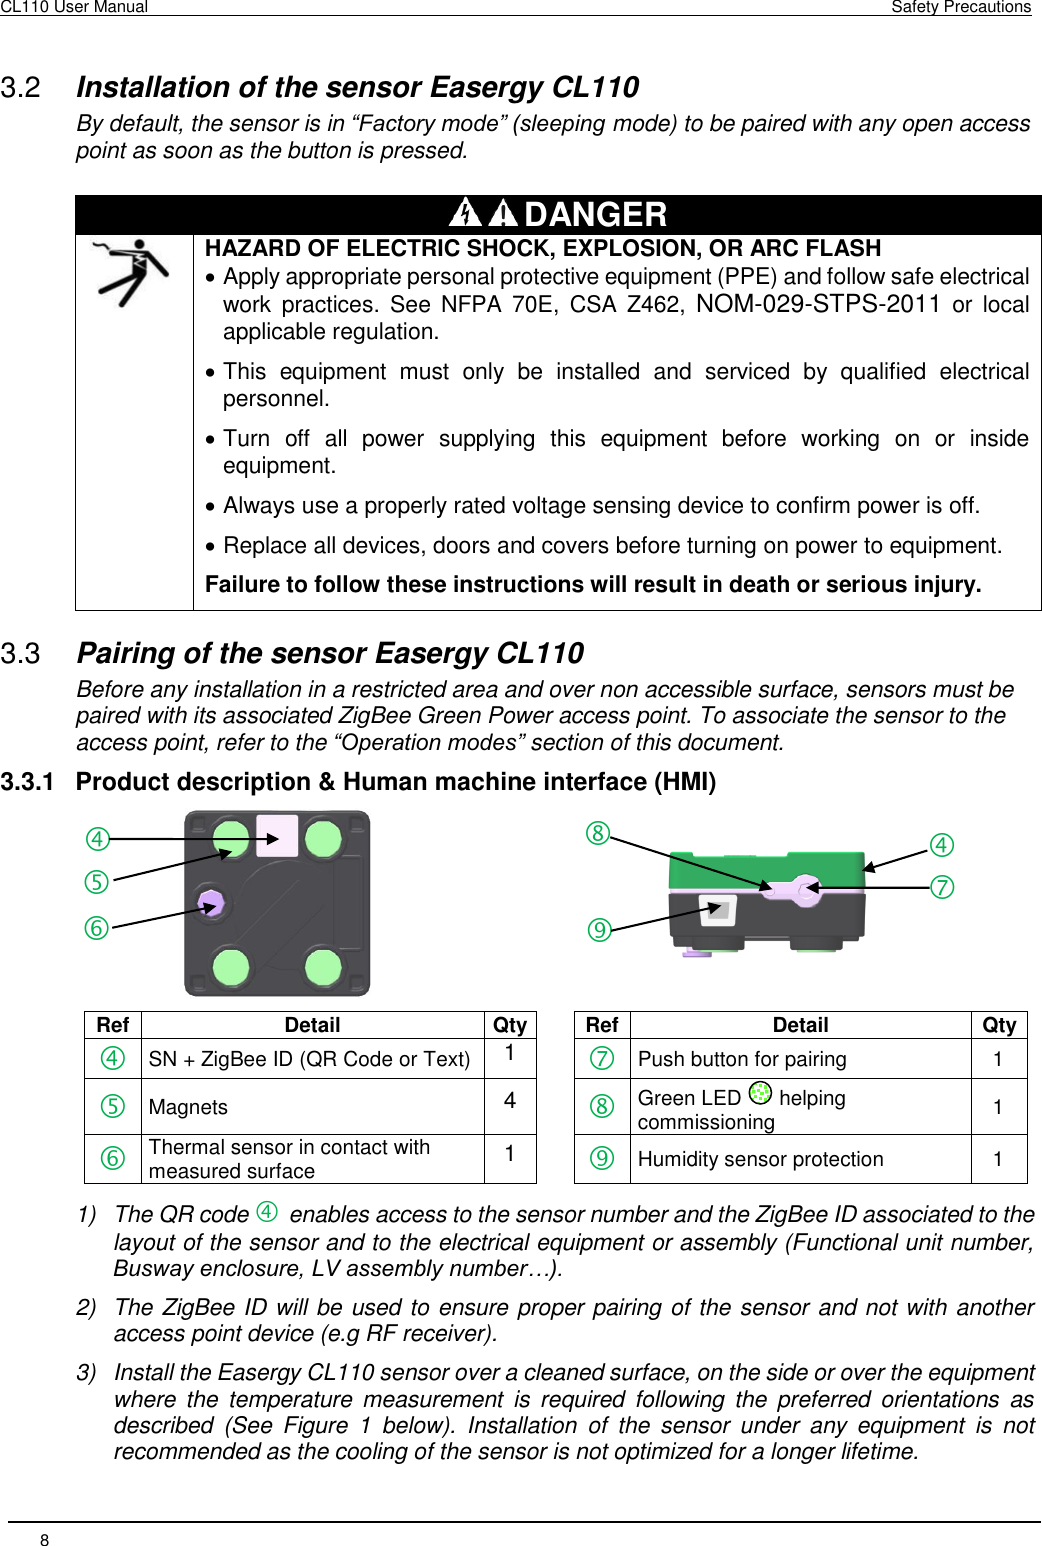 CL110 User Manual    Safety Precautions 8        3.2  Installation of the sensor Easergy CL110 By default, the sensor is in “Factory mode” (sleeping mode) to be paired with any open access point as soon as the button is pressed.  DANGER  HAZARD OF ELECTRIC SHOCK, EXPLOSION, OR ARC FLASH  Apply appropriate personal protective equipment (PPE) and follow safe electrical work  practices.  See  NFPA  70E,  CSA  Z462,  NOM-029-STPS-2011  or  local applicable regulation.  This  equipment  must  only  be  installed  and  serviced  by  qualified  electrical personnel.  Turn  off  all  power  supplying  this  equipment  before  working  on  or  inside equipment.  Always use a properly rated voltage sensing device to confirm power is off.  Replace all devices, doors and covers before turning on power to equipment. Failure to follow these instructions will result in death or serious injury. 3.3  Pairing of the sensor Easergy CL110 Before any installation in a restricted area and over non accessible surface, sensors must be paired with its associated ZigBee Green Power access point. To associate the sensor to the access point, refer to the “Operation modes” section of this document. 3.3.1  Product description &amp; Human machine interface (HMI)    Ref Detail Qty  Ref Detail Qty  SN + ZigBee ID (QR Code or Text) 1   Push button for pairing 1  Magnets 4   Green LED   helping commissioning 1  Thermal sensor in contact with measured surface  1   Humidity sensor protection  1 1)  The QR code  enables access to the sensor number and the ZigBee ID associated to the layout of the sensor and to the electrical equipment or assembly (Functional unit number, Busway enclosure, LV assembly number…). 2)  The ZigBee ID will be used to ensure proper pairing of the sensor and not with another access point device (e.g RF receiver). 3)  Install the Easergy CL110 sensor over a cleaned surface, on the side or over the equipment where  the  temperature  measurement  is  required  following  the  preferred  orientations  as described  (See  Figure  1  below).  Installation  of  the  sensor  under  any  equipment  is  not recommended as the cooling of the sensor is not optimized for a longer lifetime.         